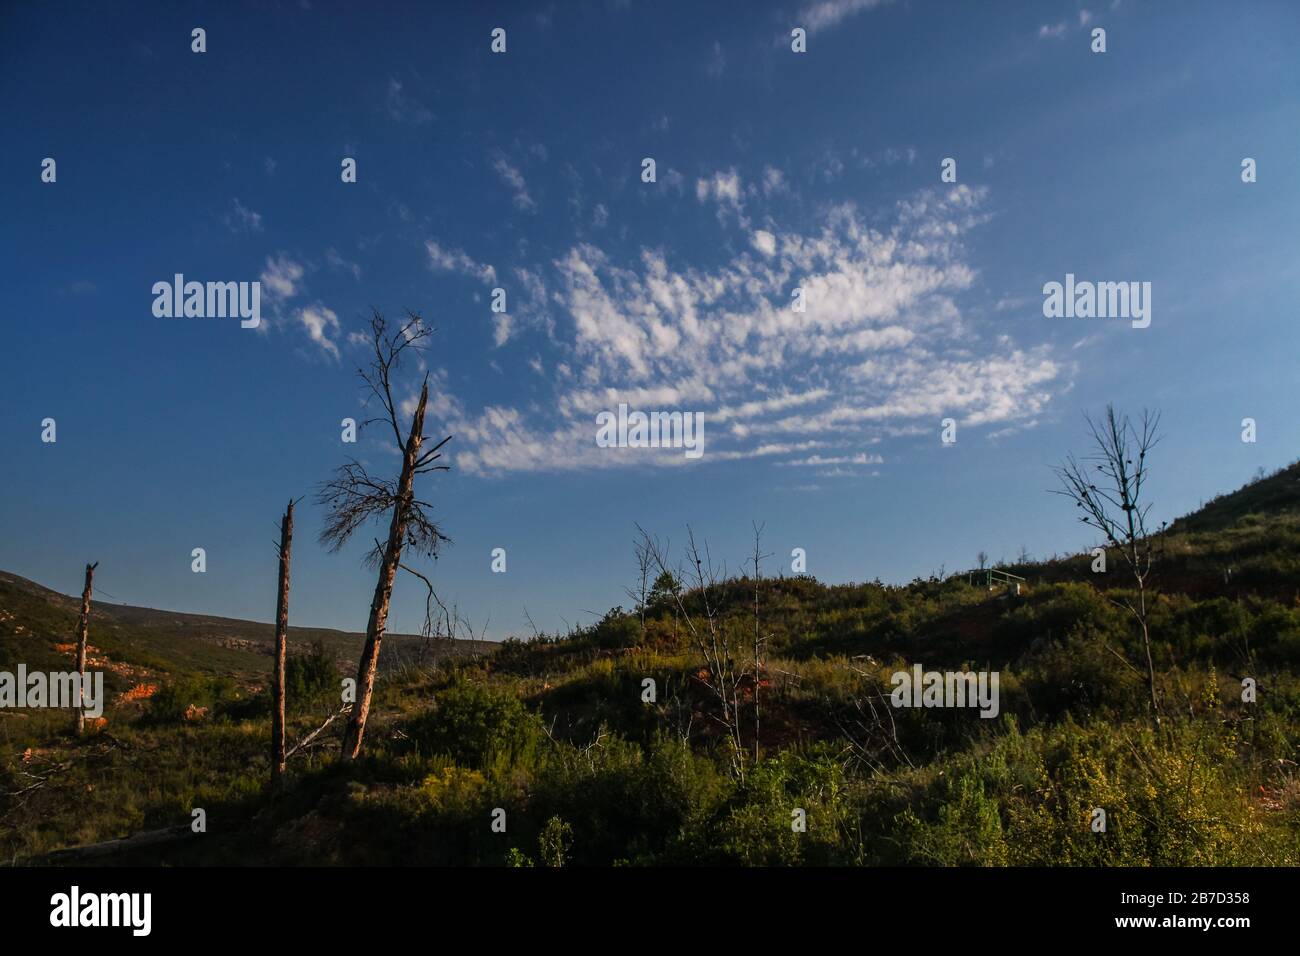 Burned trees with blue sky background at sunset with white clouds Stock Photo